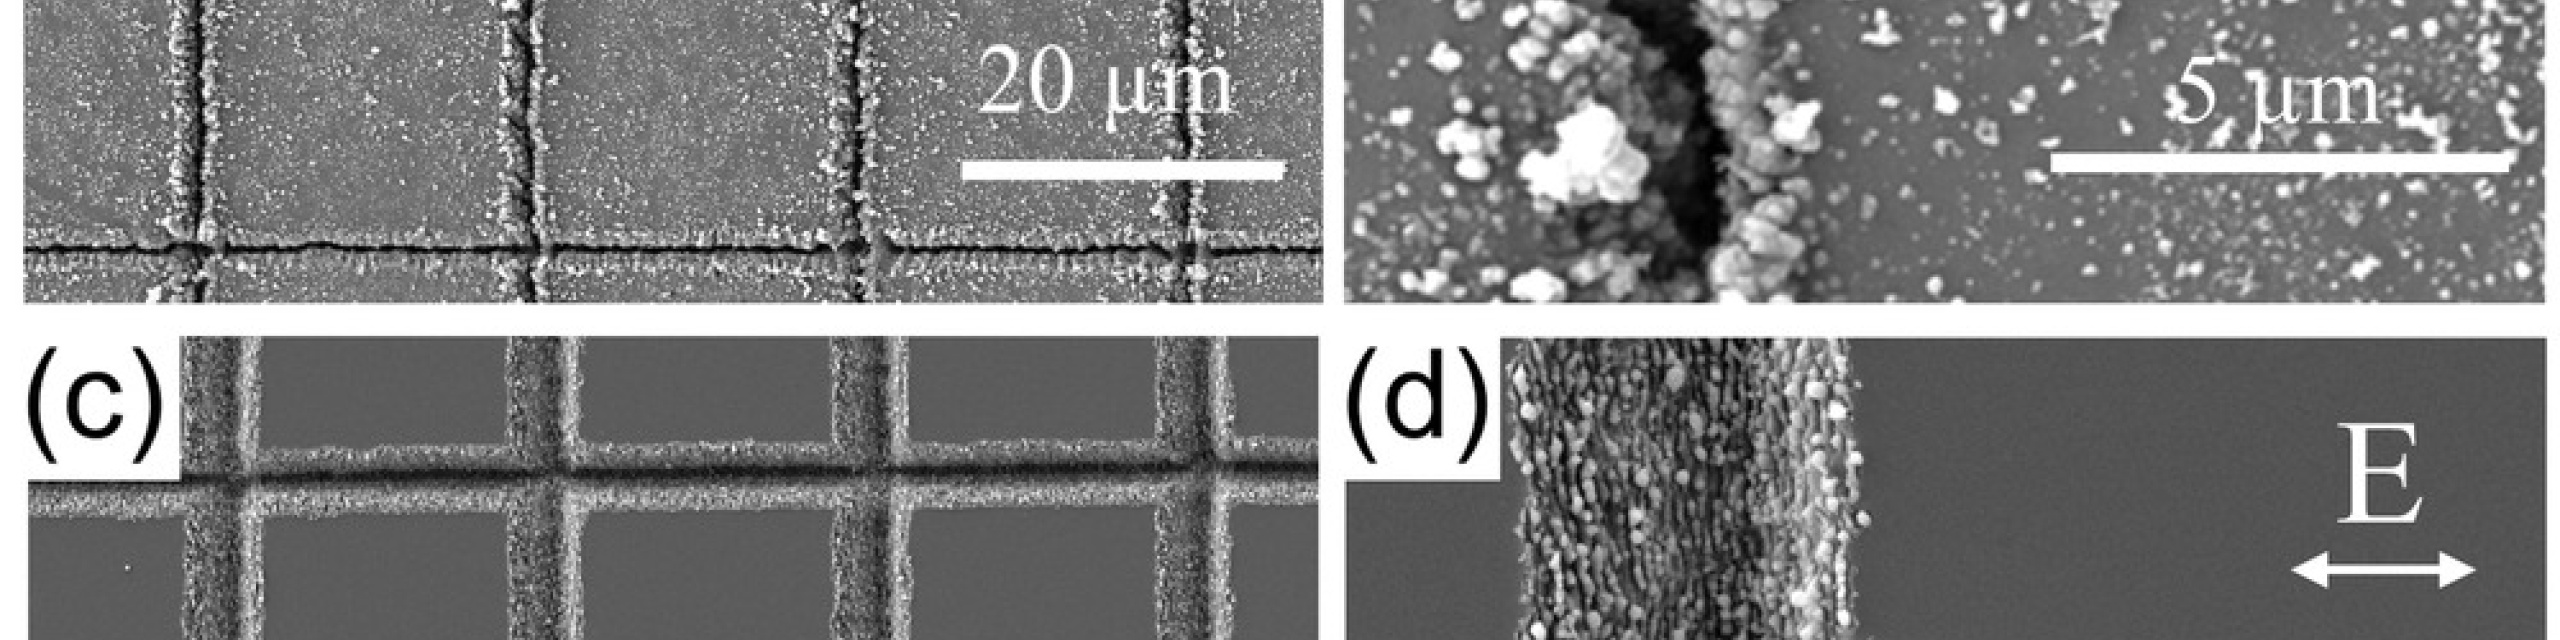 SEM micrographs show micro-grids on silicon with and without frost layer. Frost...